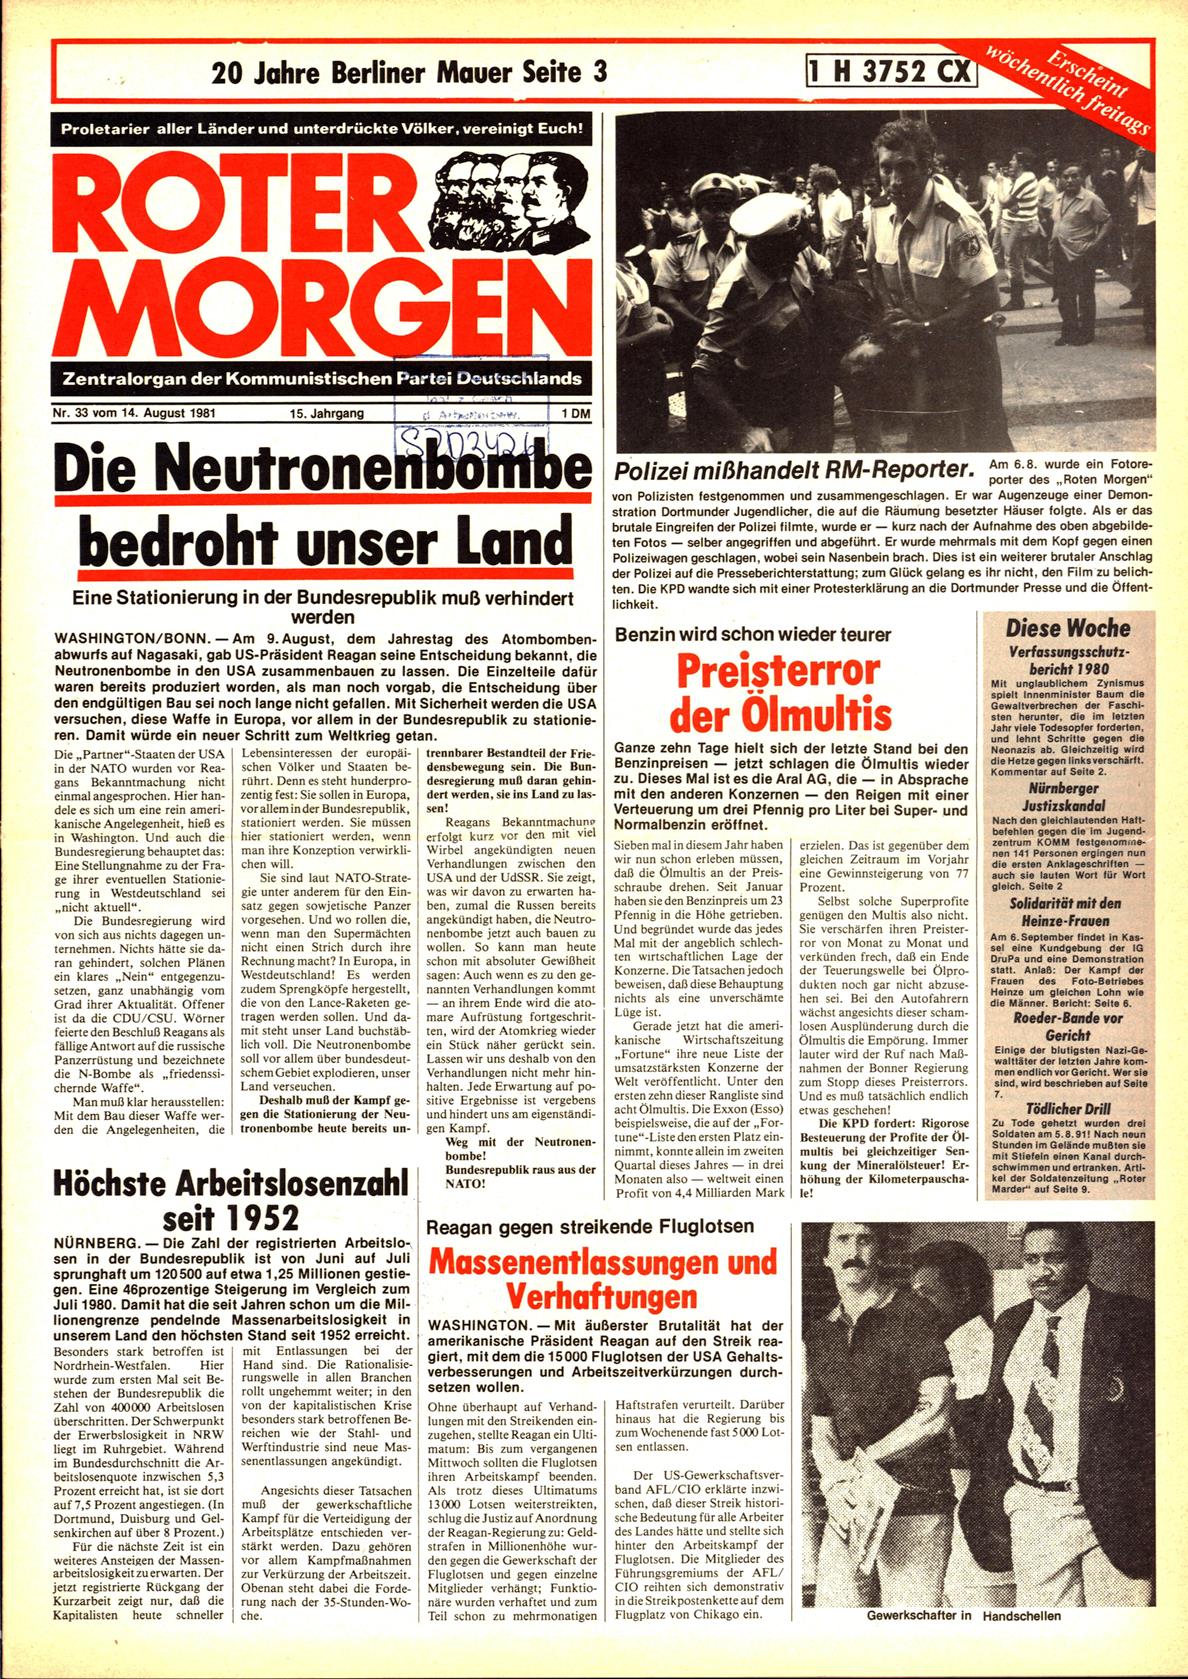 Roter Morgen, 15. Jg., 14. August 1981, Nr. 33, Seite 1